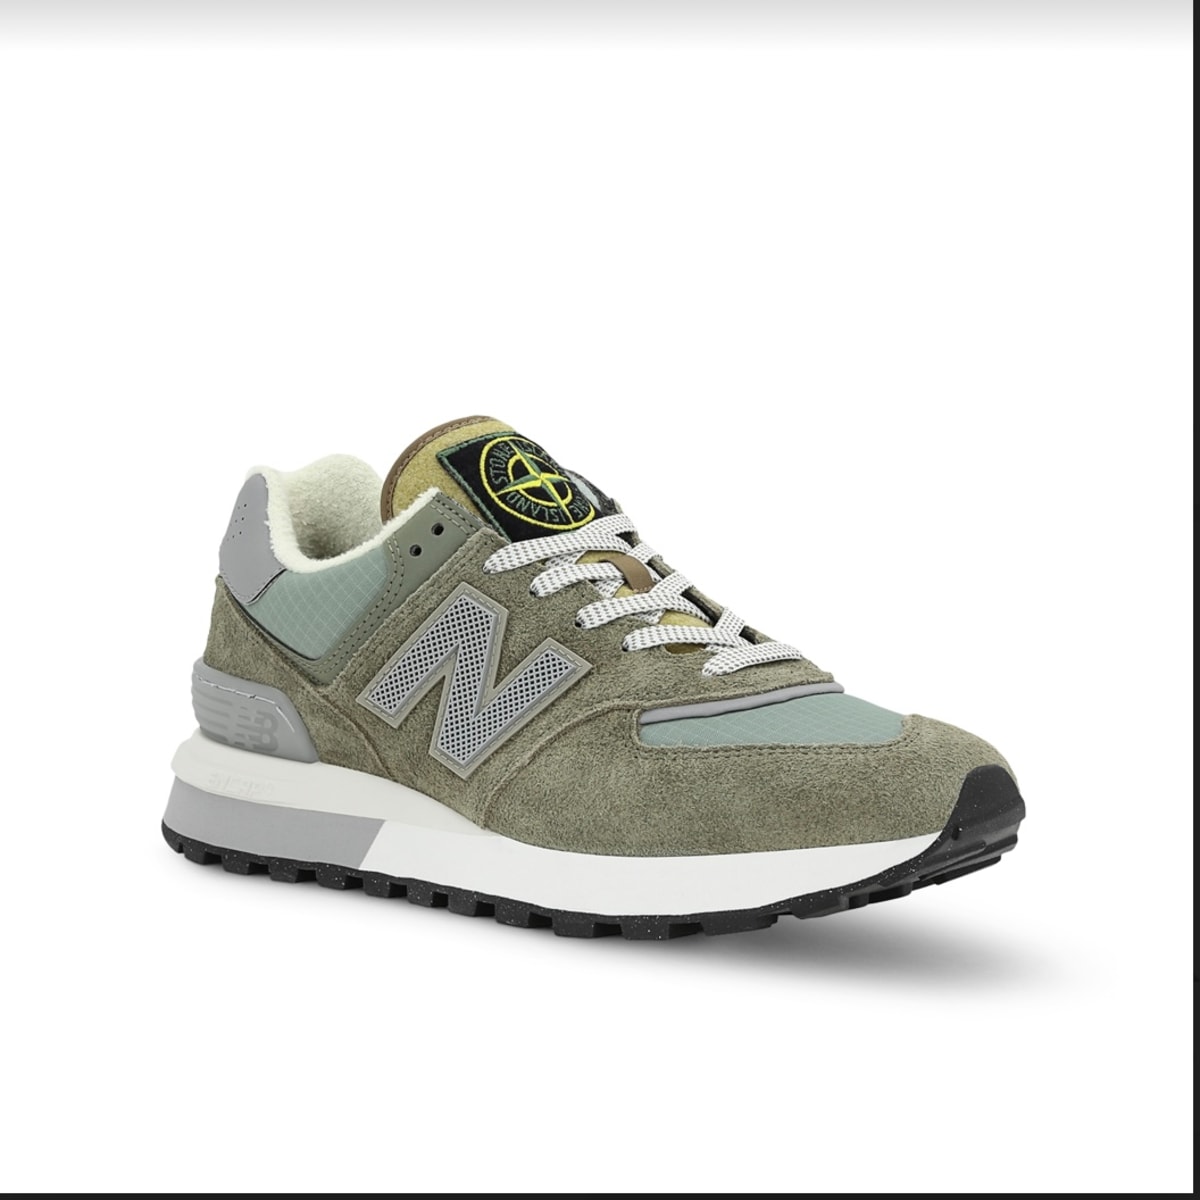 New Balance Football on X: Green and white runs throughout. It's